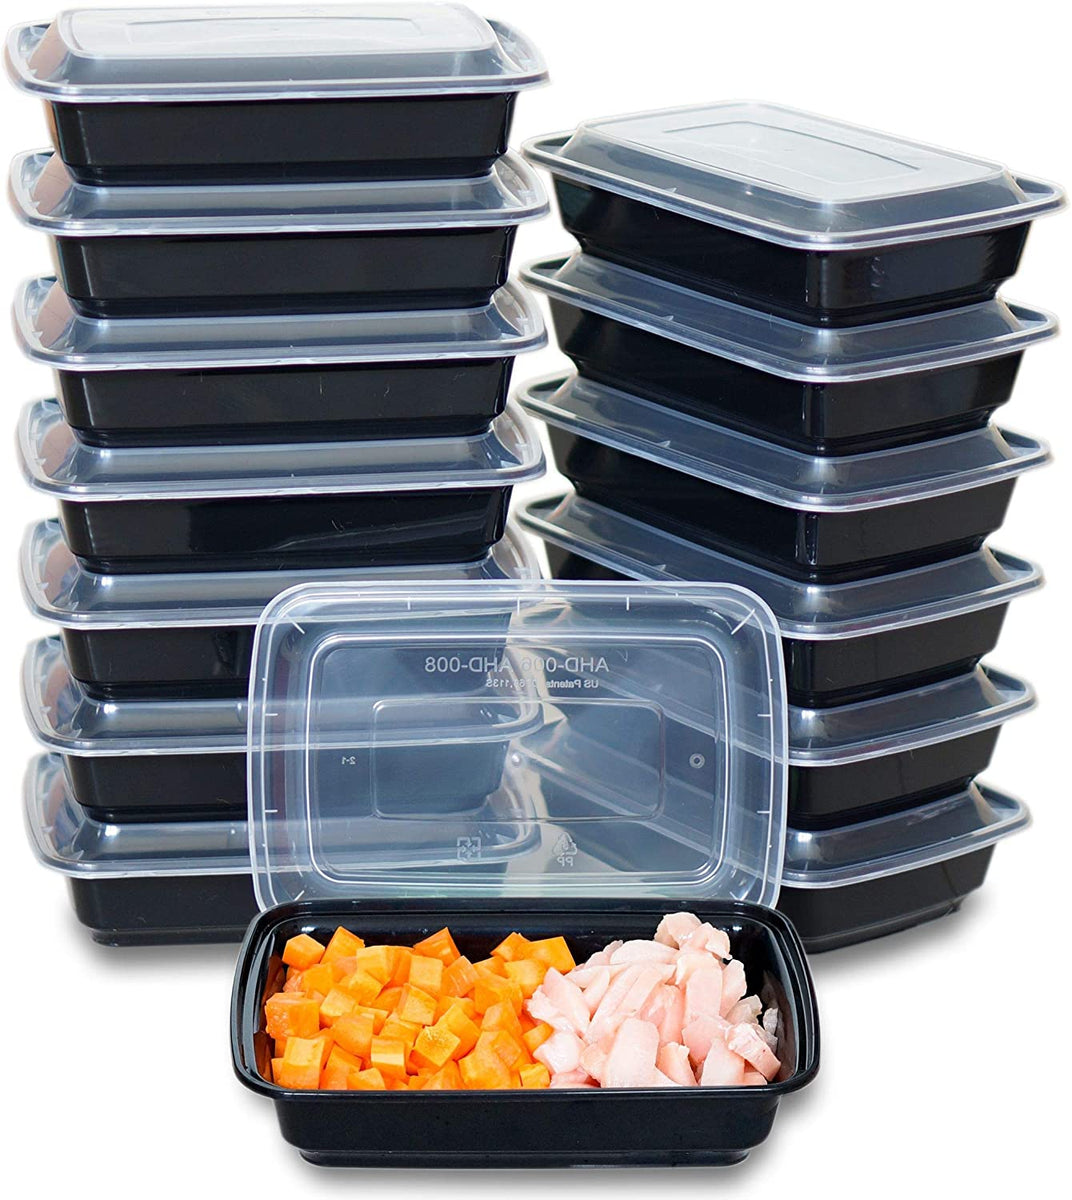 CTC-088] 1 Compartment Rectangular Meal Prep Container with Lids